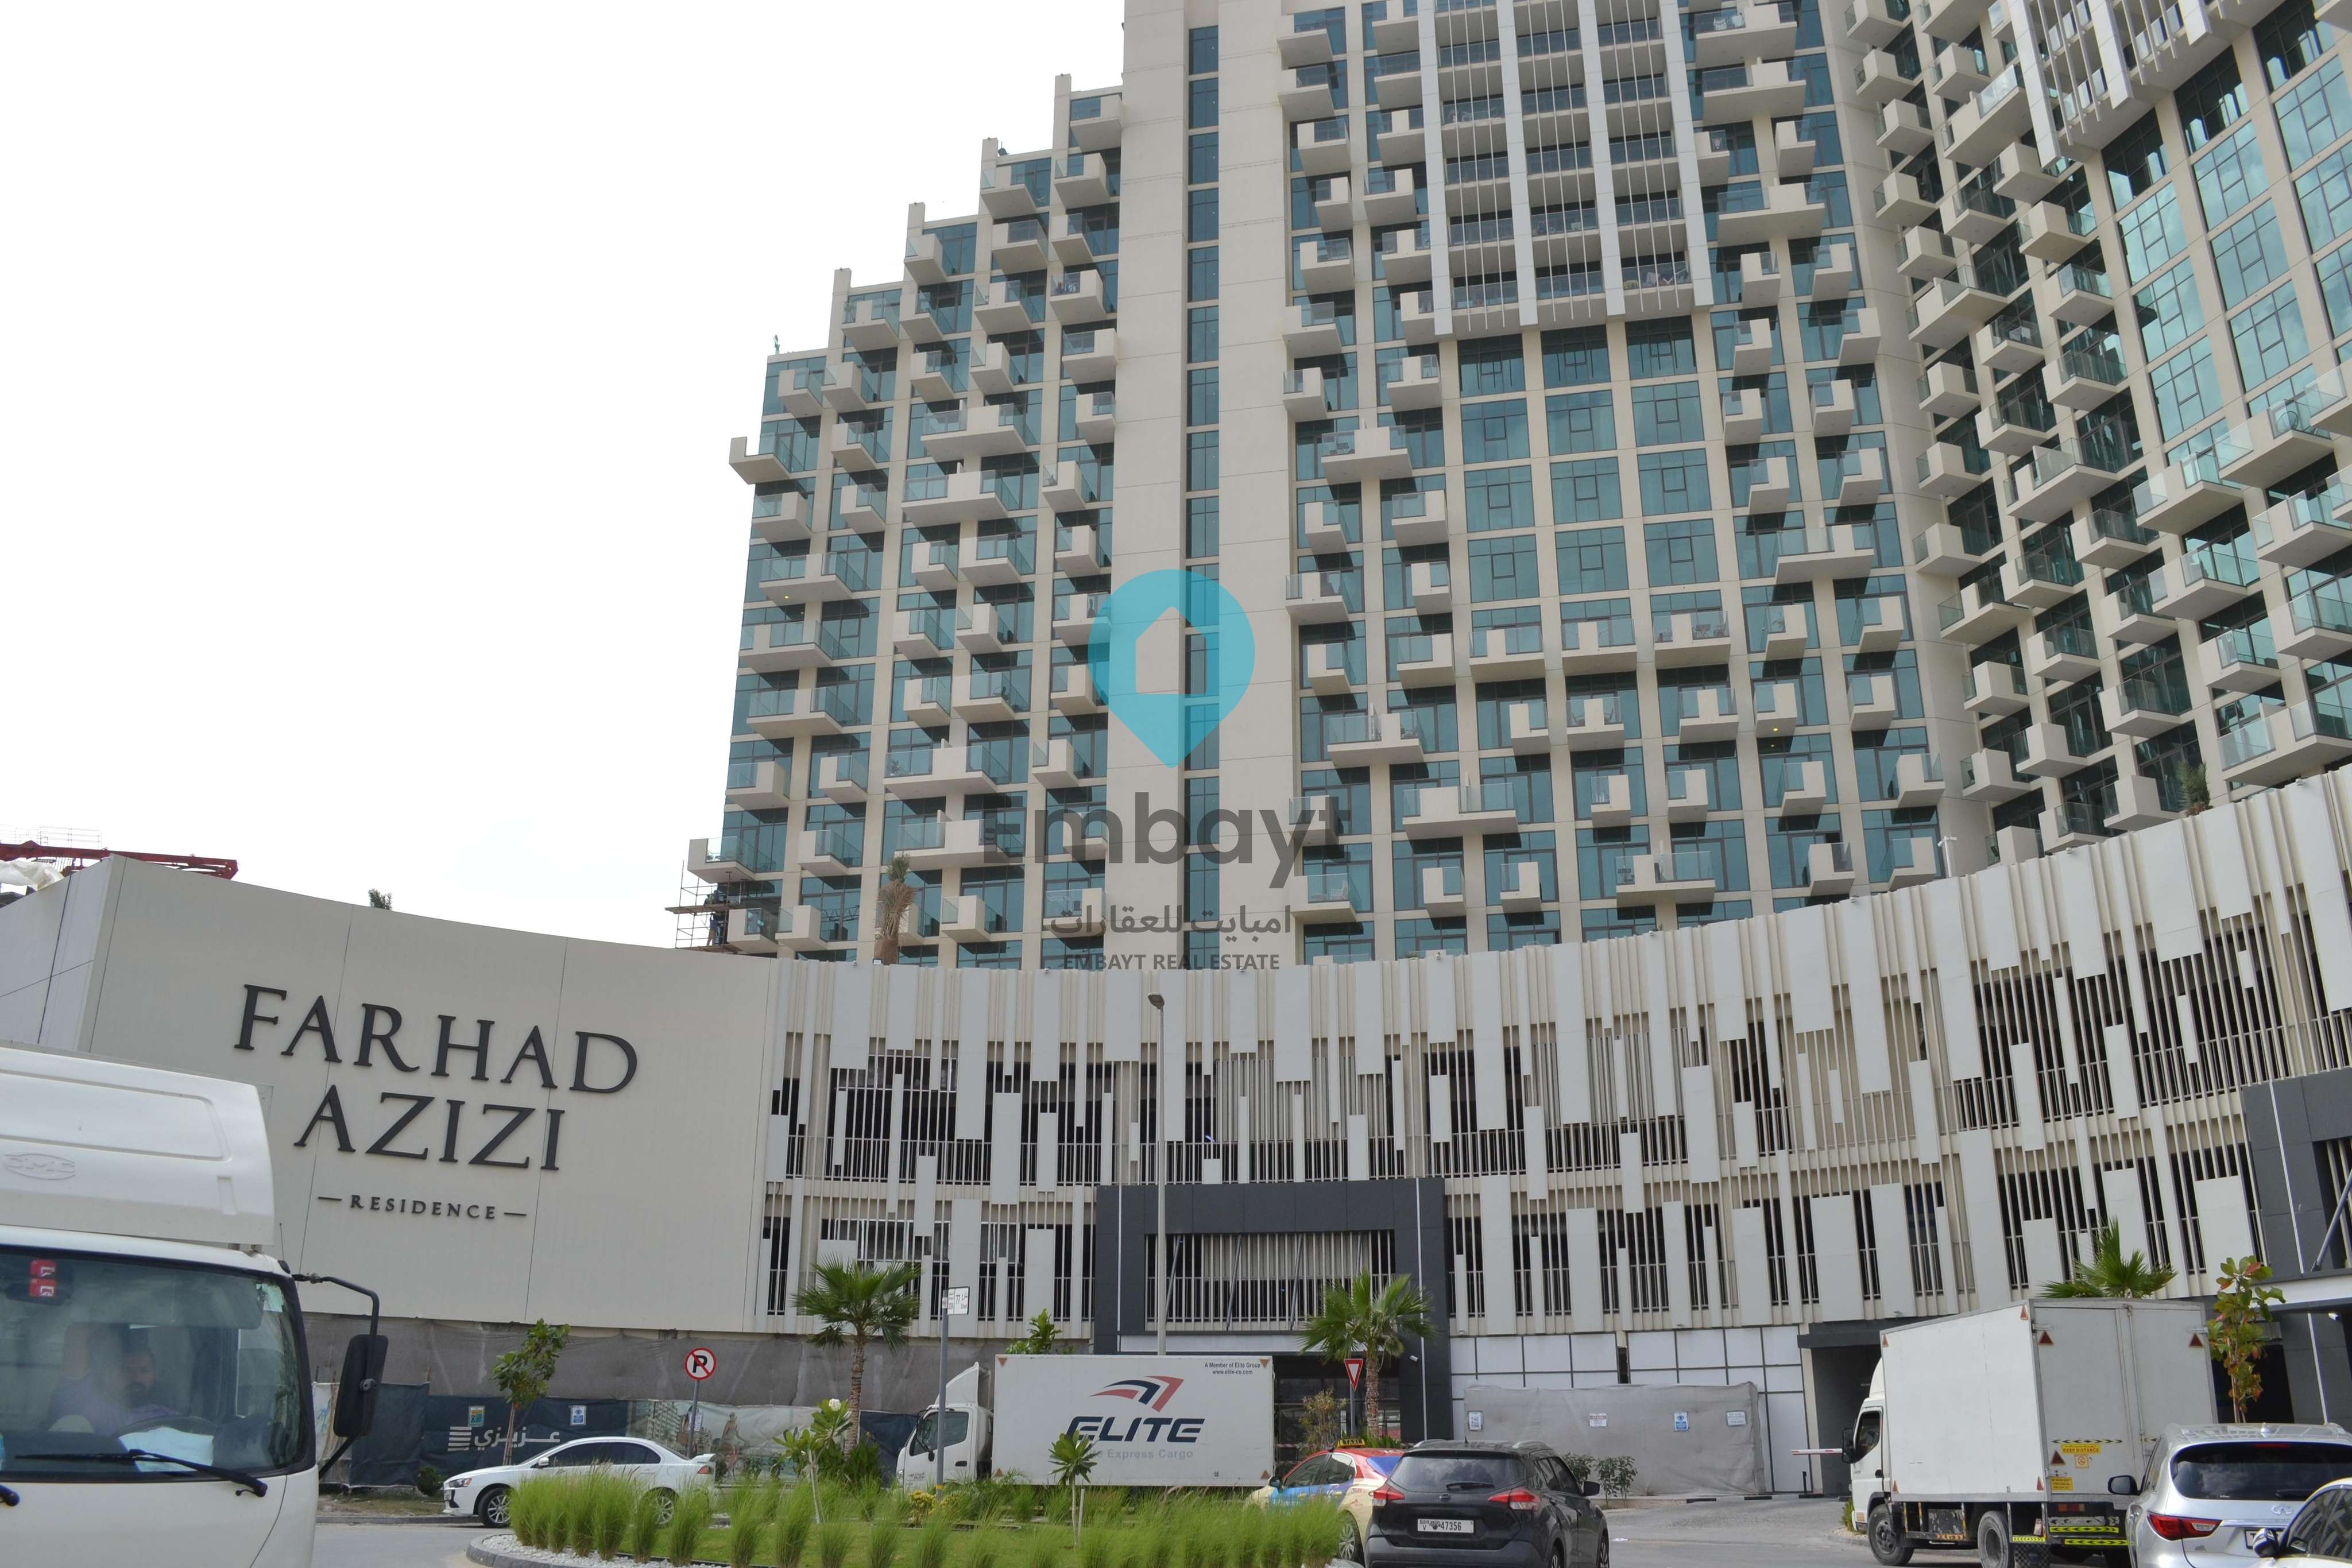  Residential Building For Sale in Farhad Azizi Residence